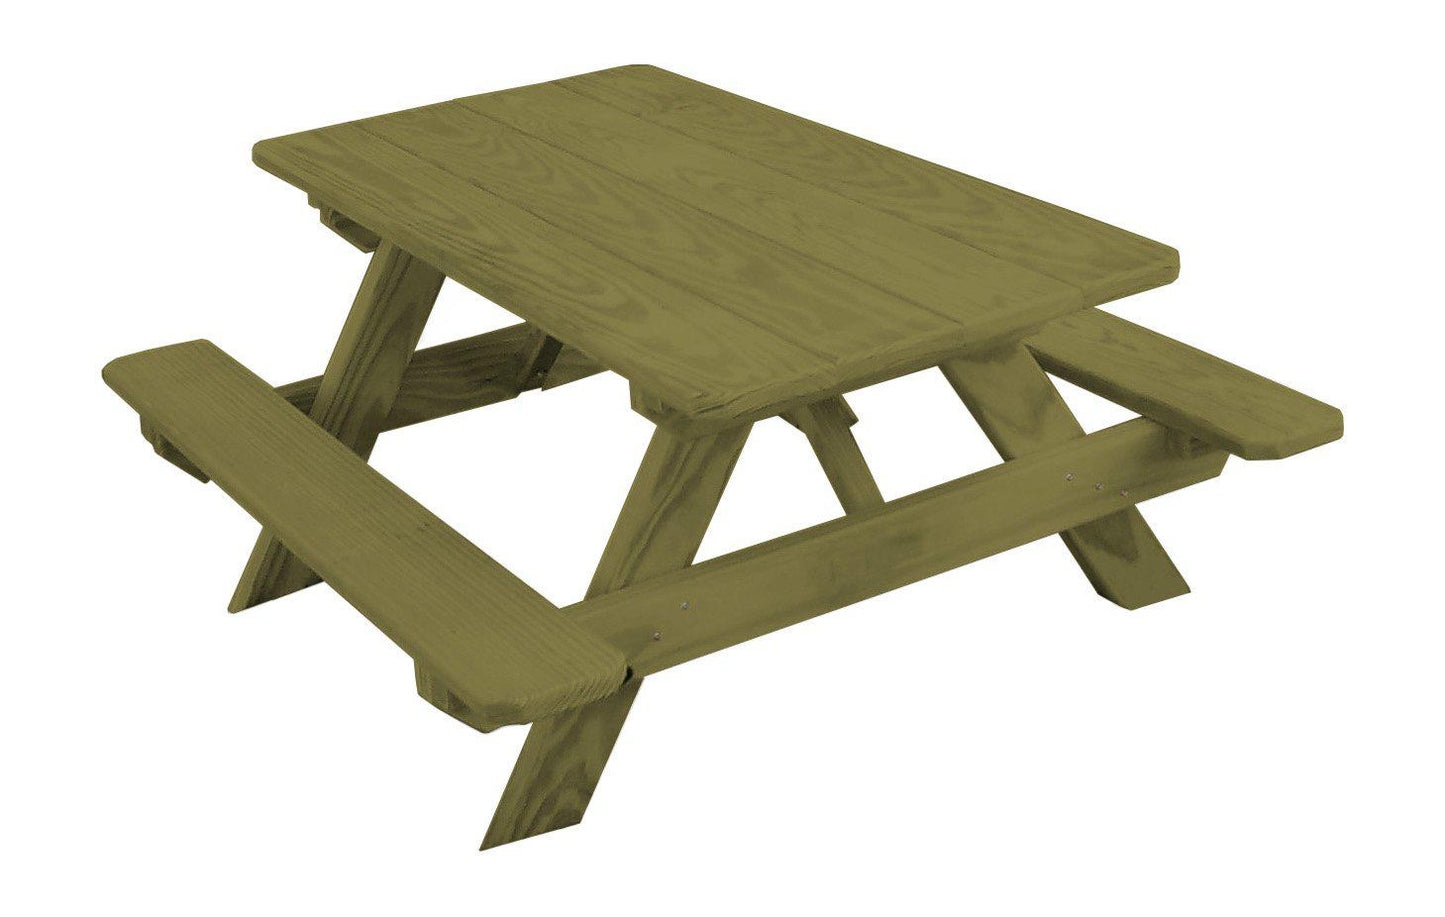 A&L Furniture Co. Yellow Pine Kid's Table (22" Wide) - Specify for FREE 2" Umbrella Hole - LEAD TIME TO SHIP 10 BUSINESS DAYS